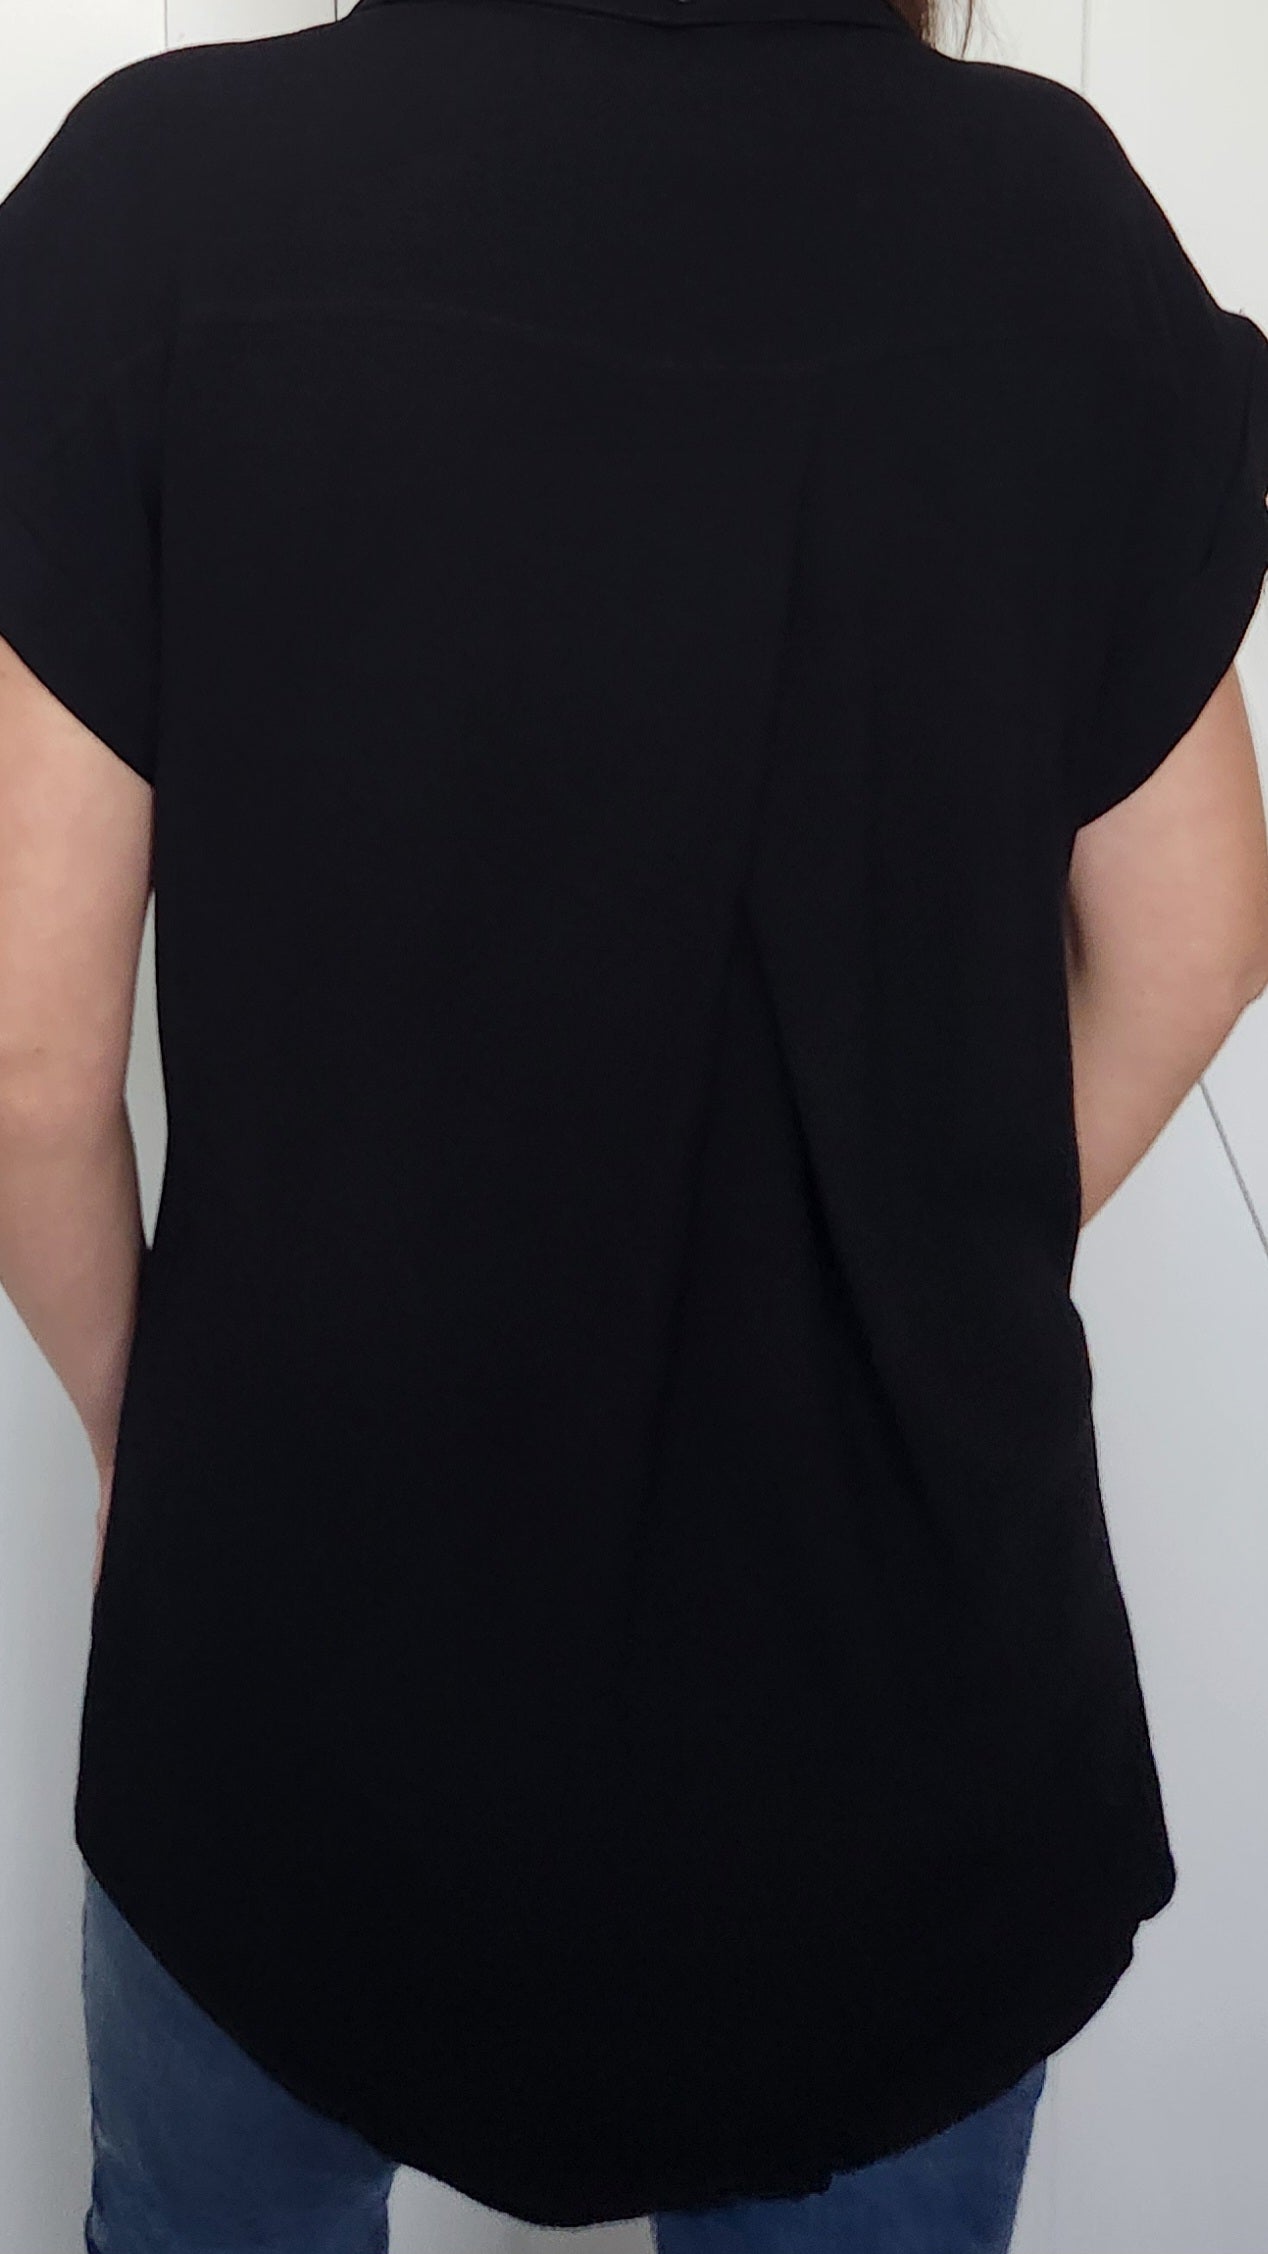 Style and Functionality Top-Black